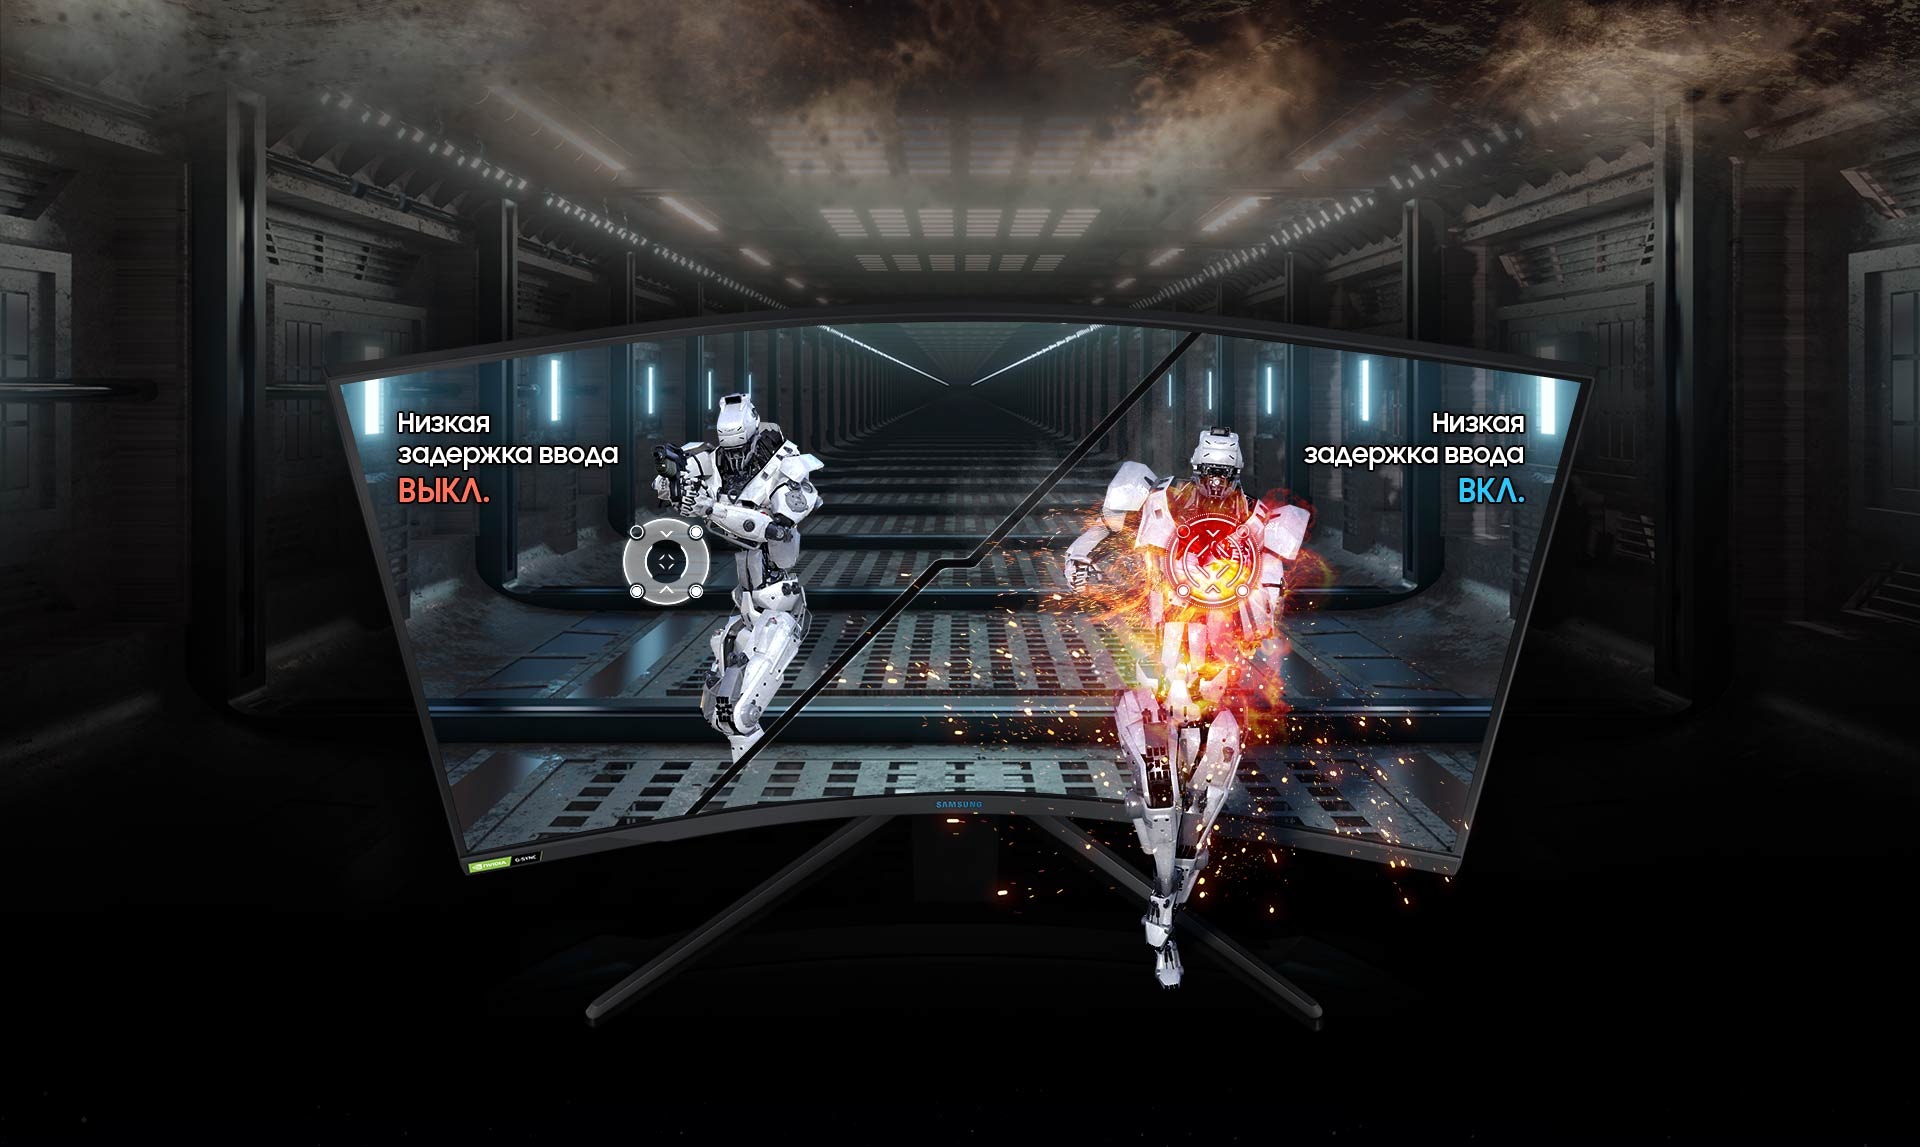 A G75T monitor shows the hallway of a spaceship, which extends off the screen into the background. The screen is split into left and right sides with attacking robots running forward with rifles on each side. On the left, the word “Low Input Lag OFF” is shown while an aiming marker is positioned to the left of the robot. On the right, the word “Low Input Lag ON” is shown while the aiming marker has successfully fired on the robot. 